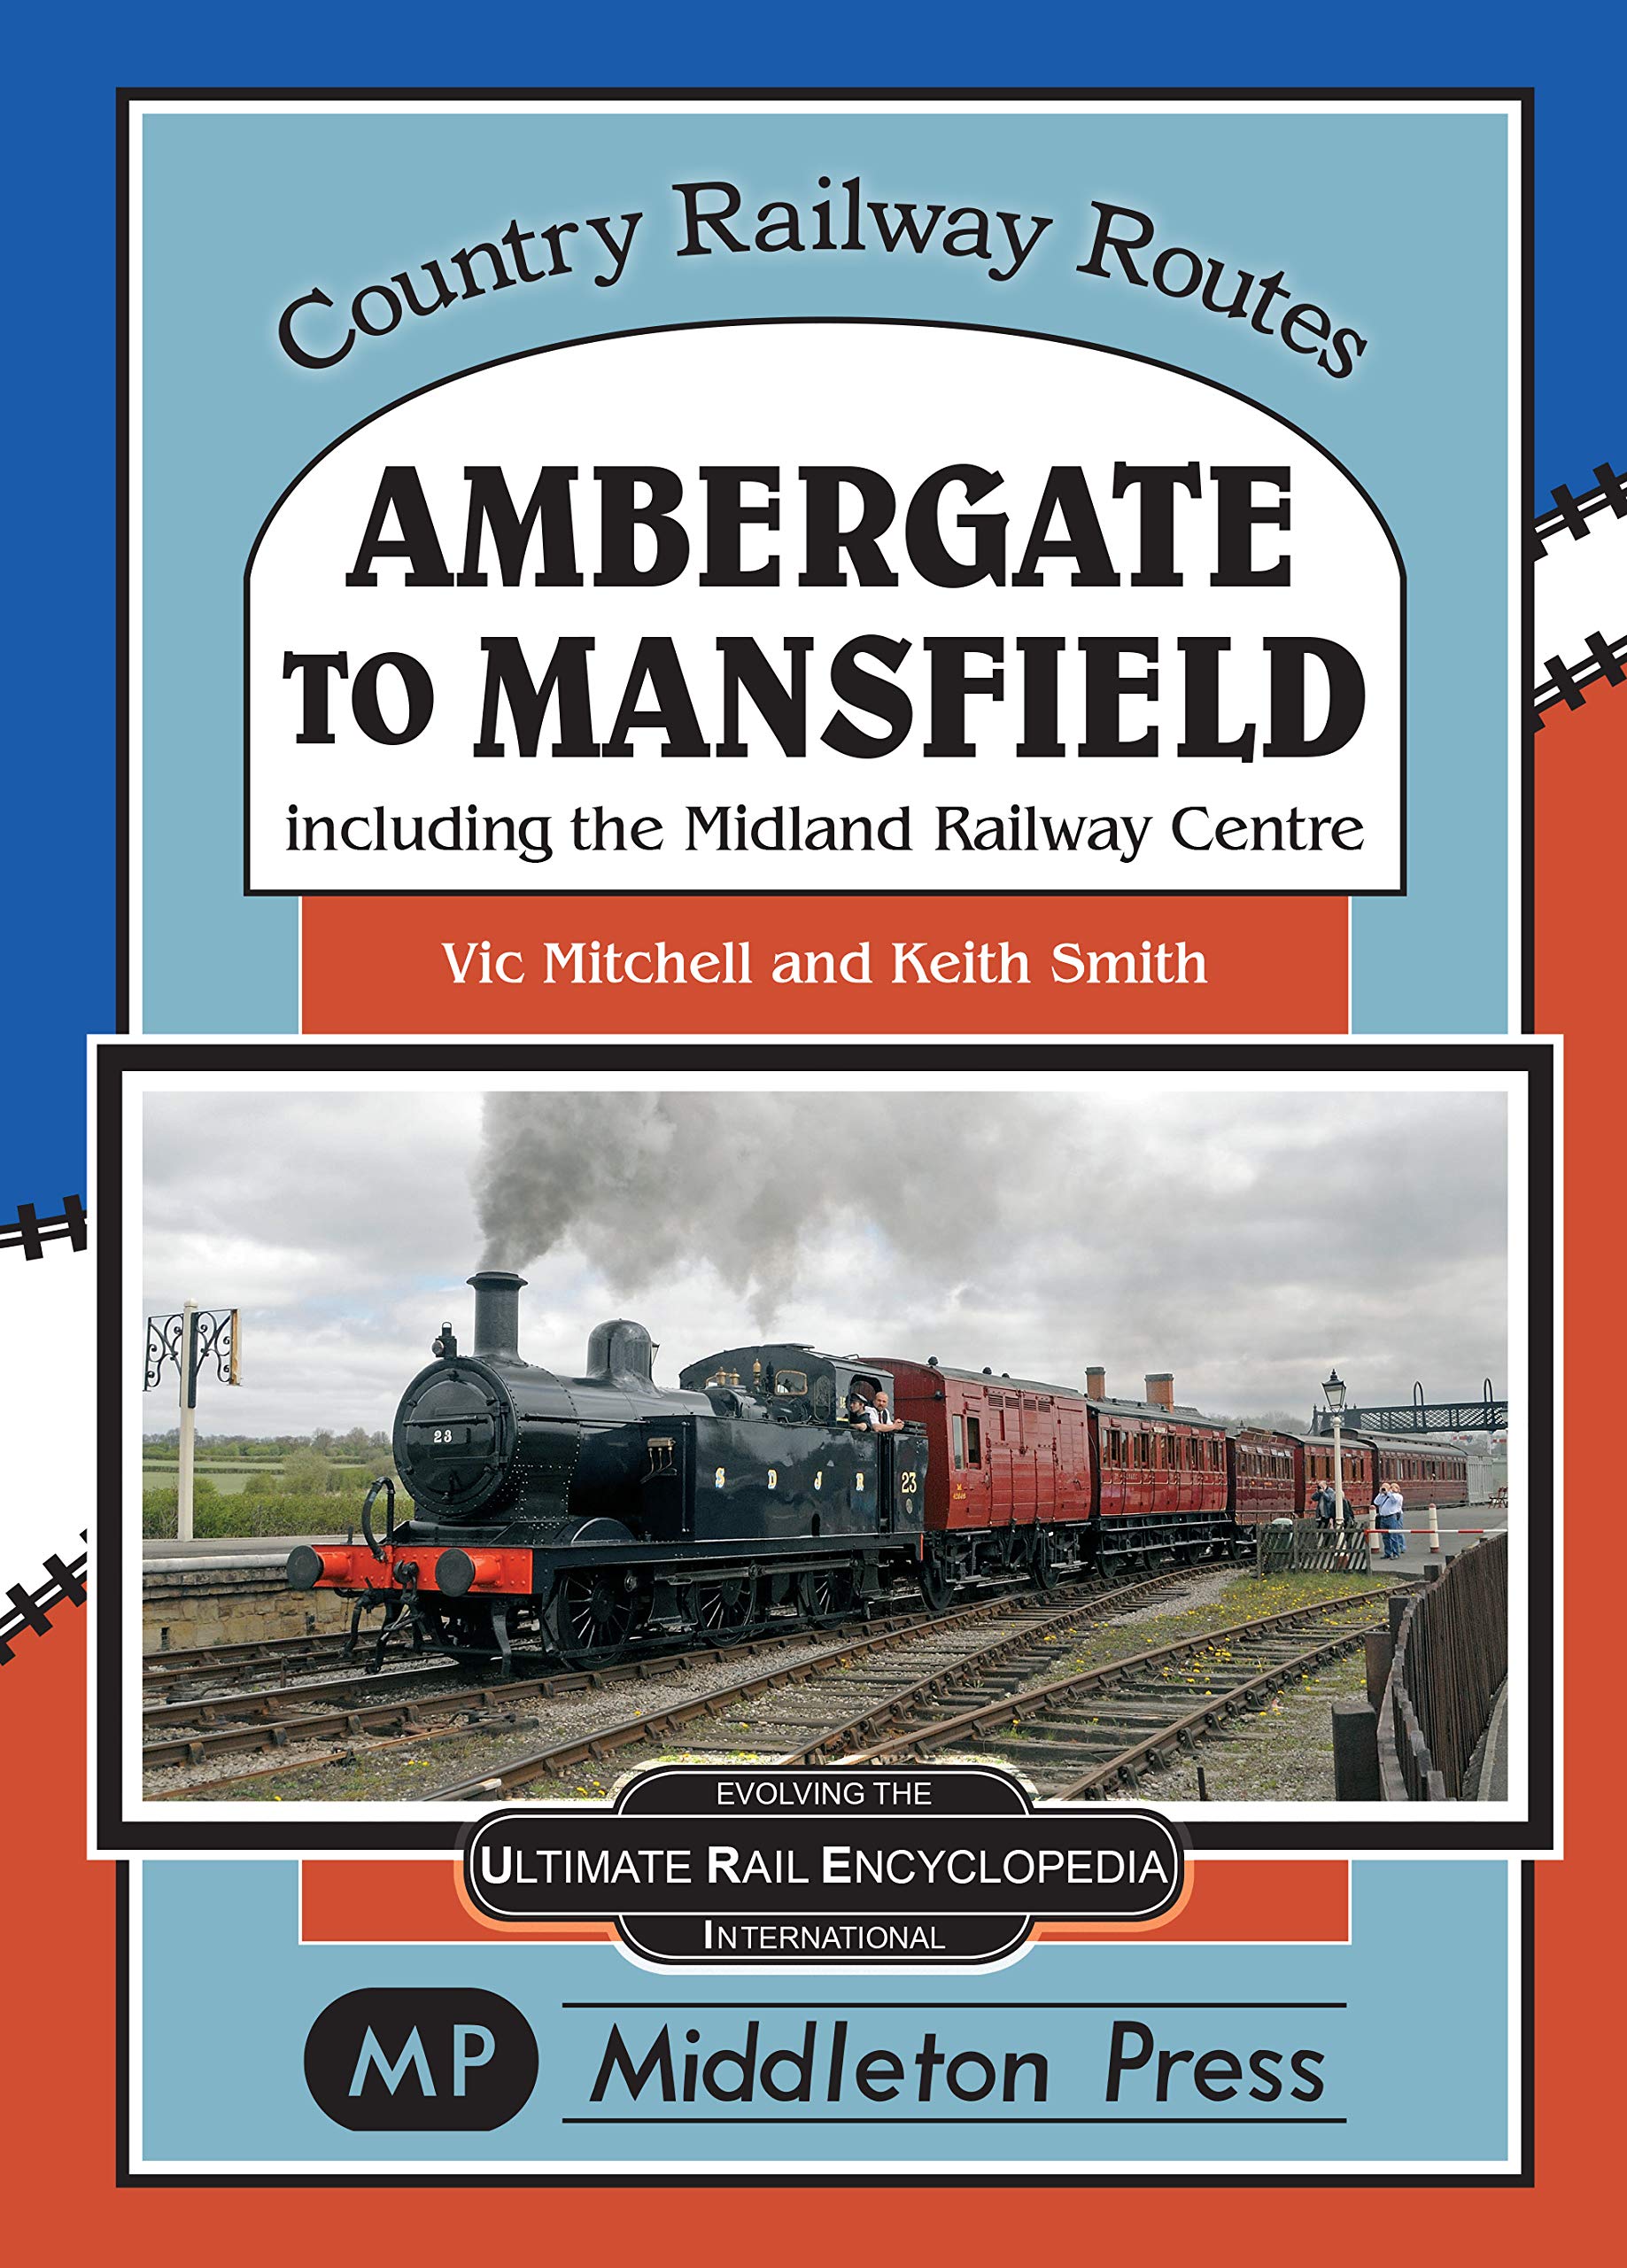 Country Railway Routes Ambergate to Mansfield including the Midland Railway - Butterley